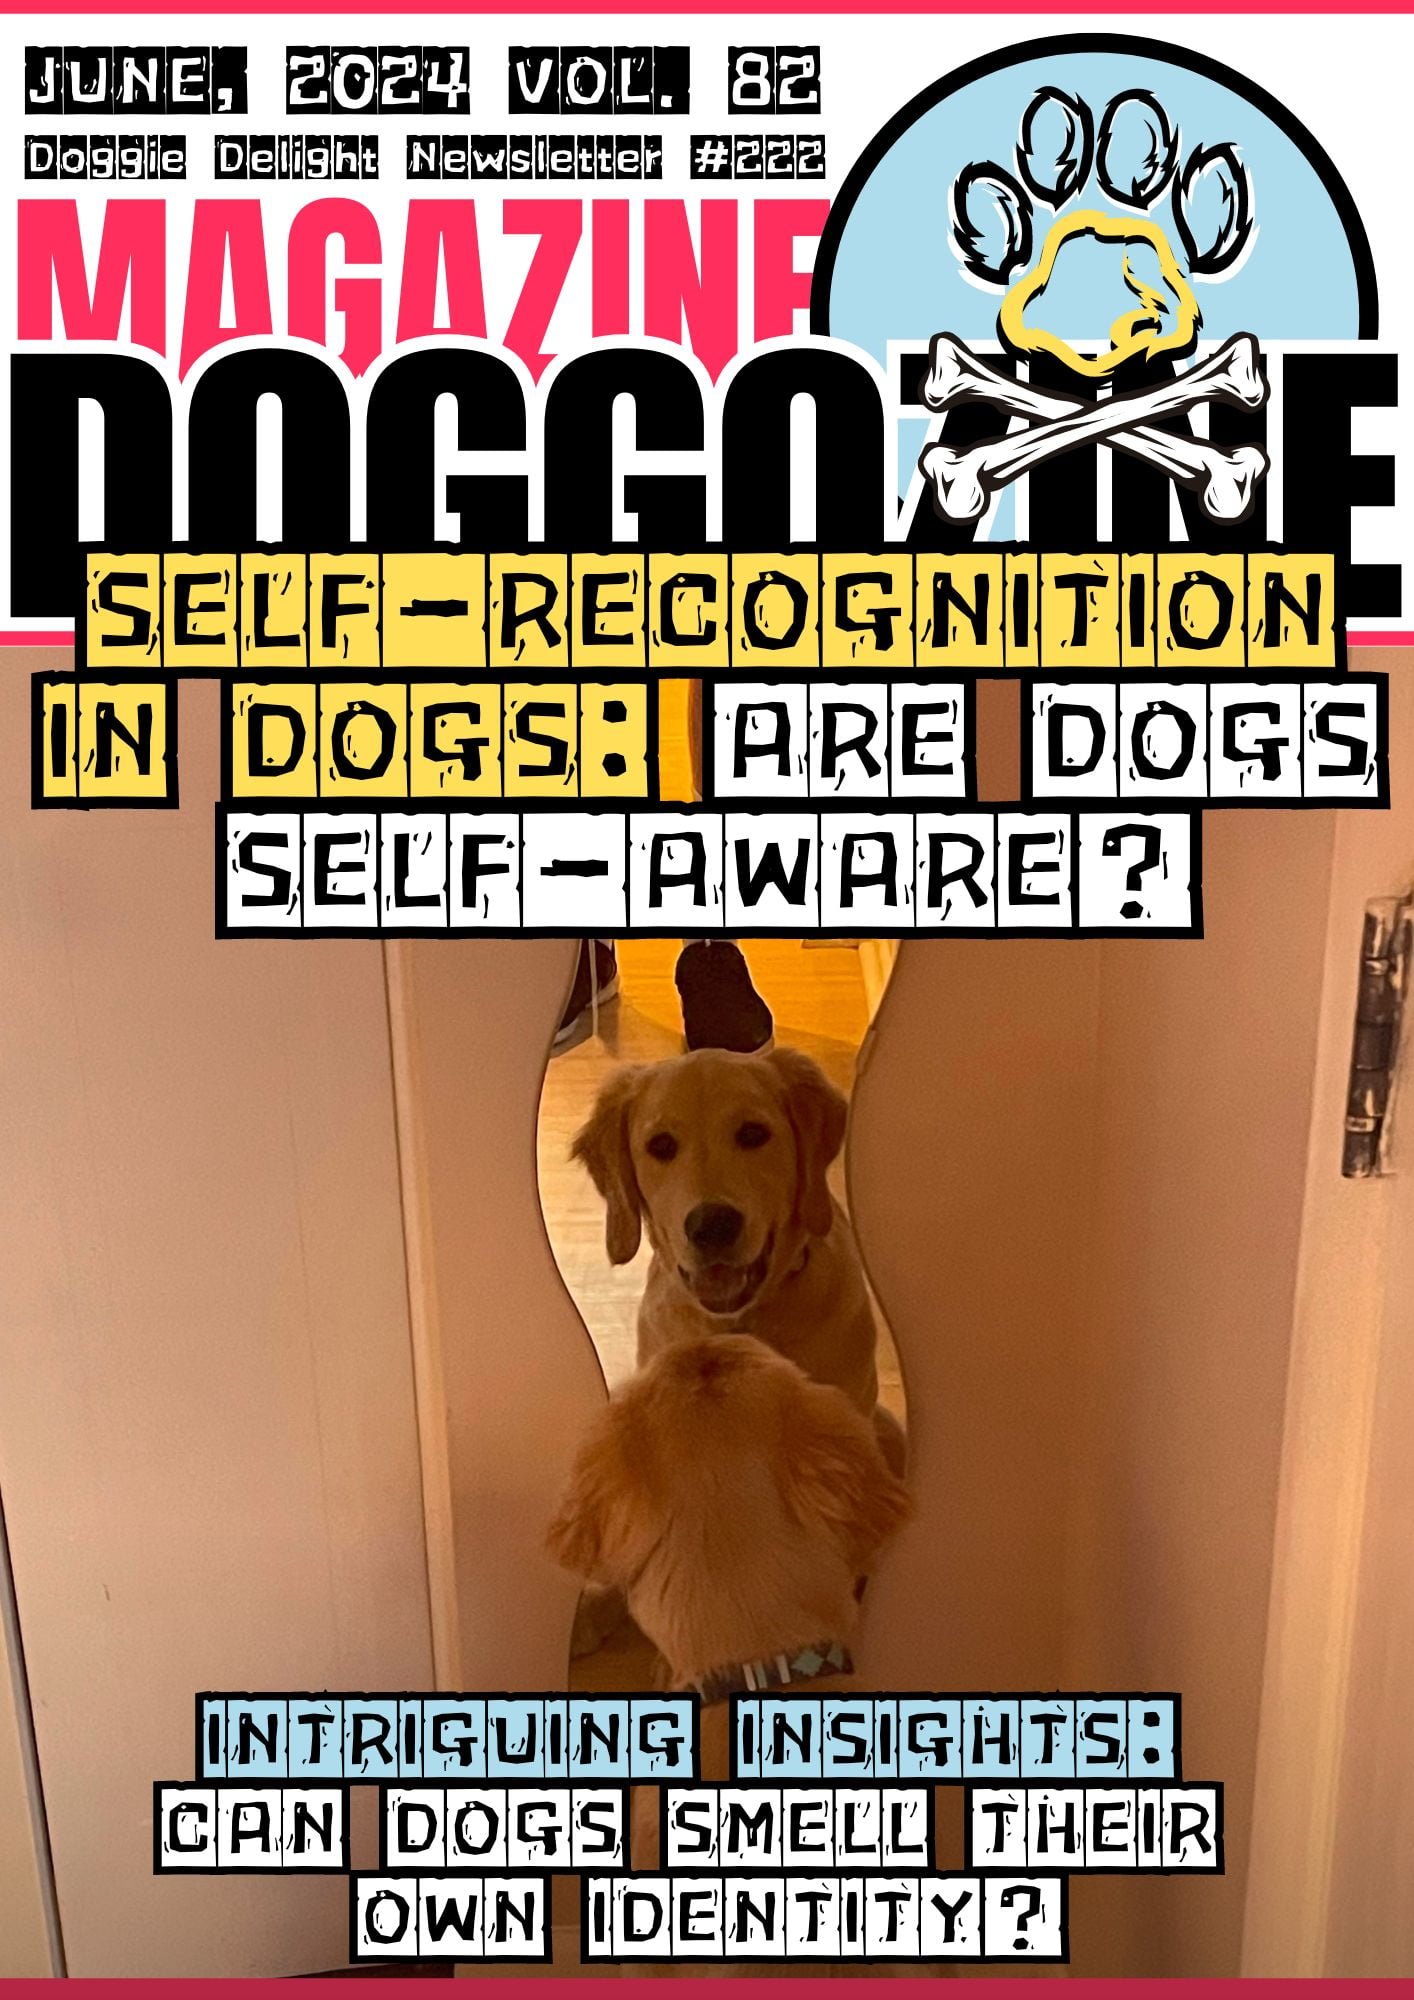 self-recognition in dogs